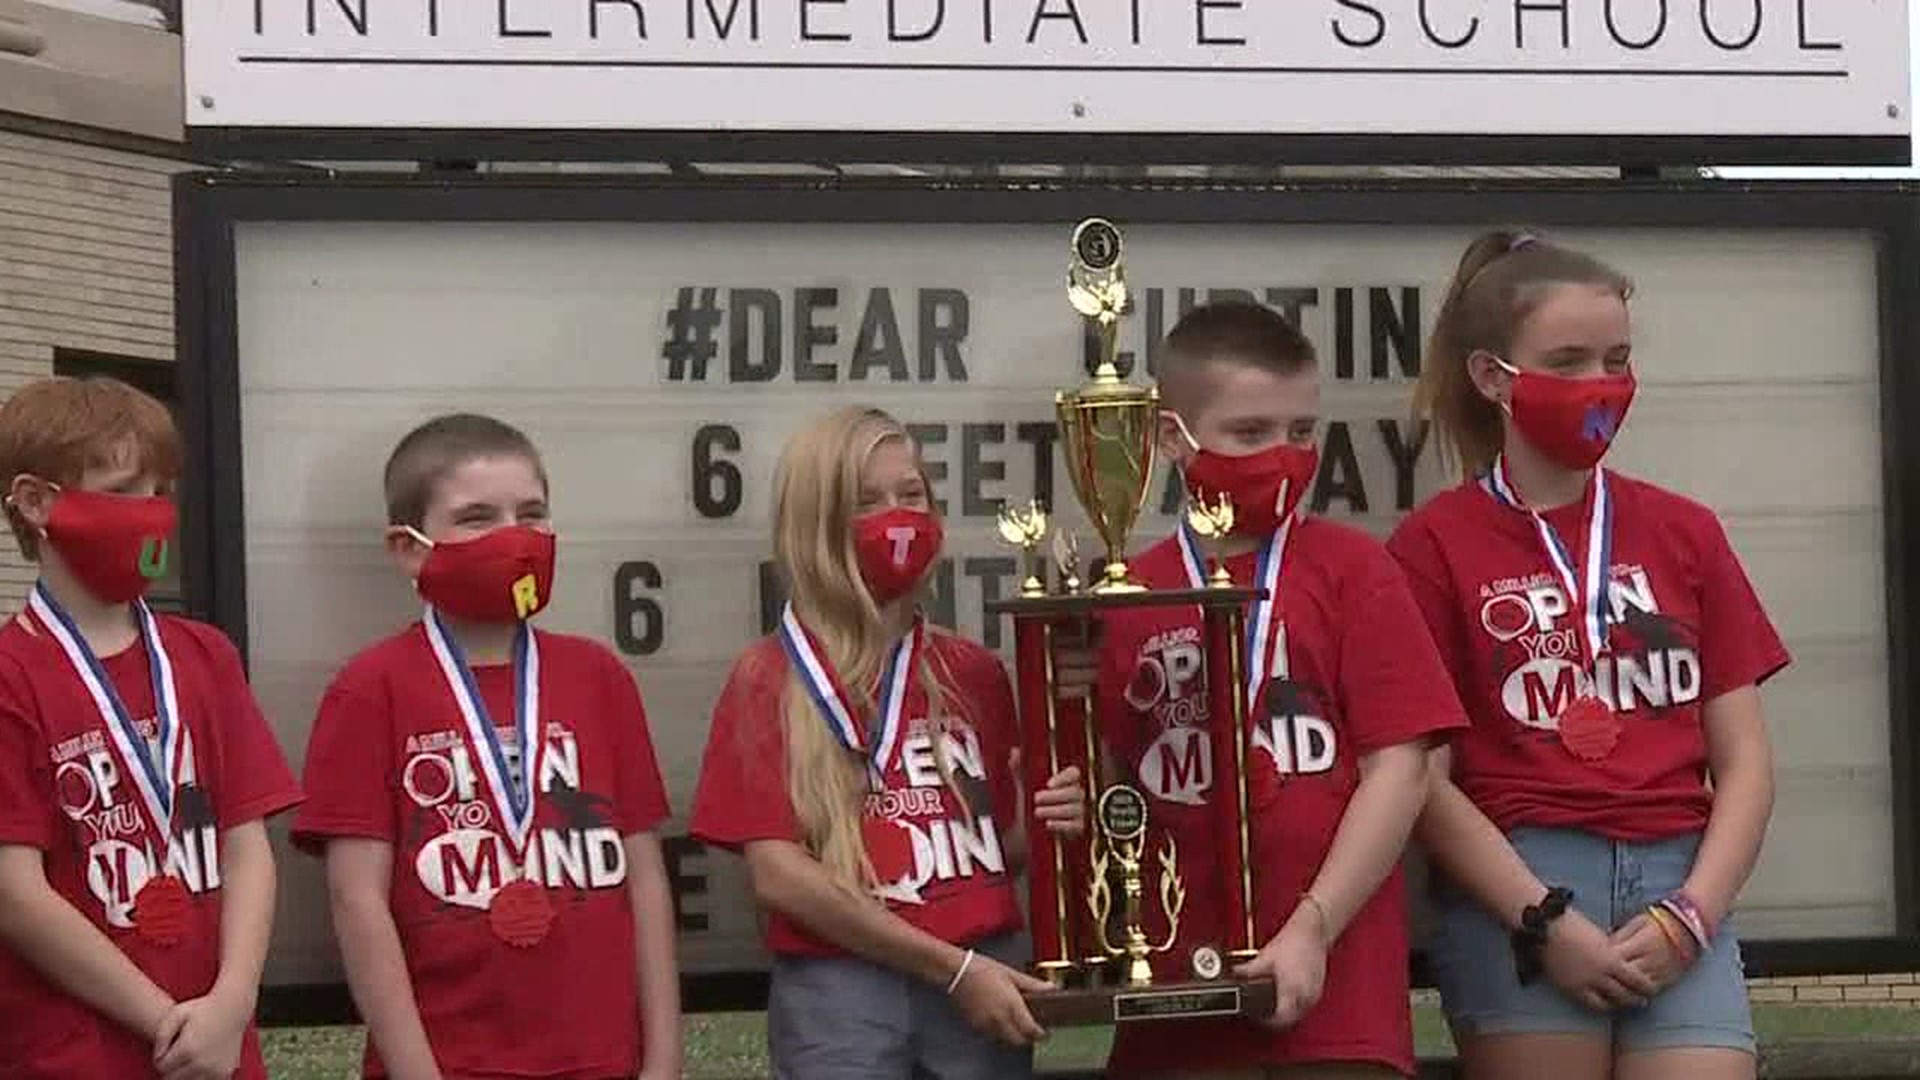 A team of 4th and 5th graders from Curtin Intermediate School were honored for their achievement.